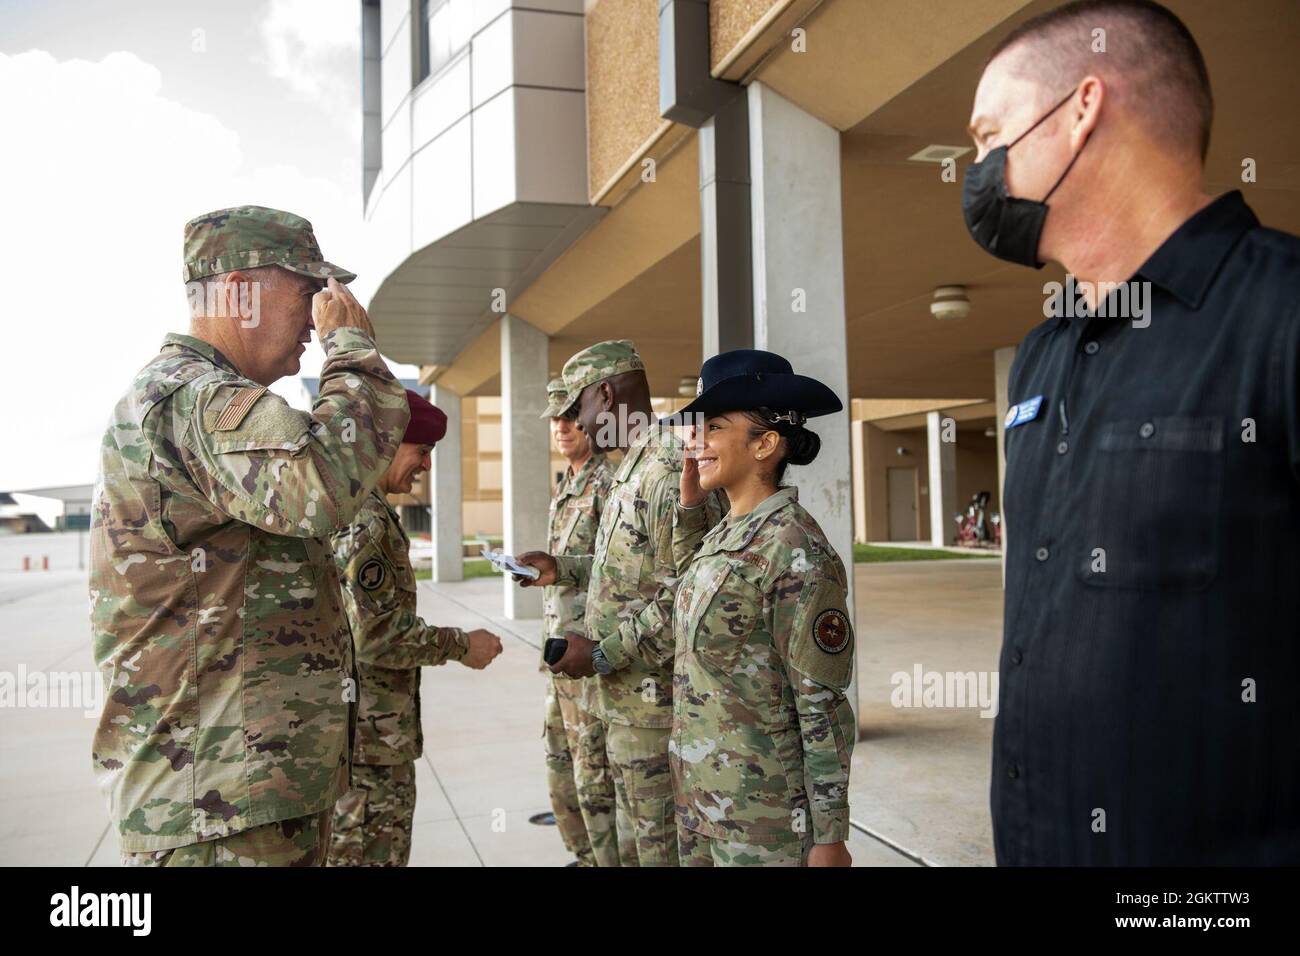 U.S. Air Force Gen. John E. Hyten (left), vice chairman of the Joint Chiefs of Staff, returns a salute after presenting Tech. Sgt. Genesis Infante (center), 737th Training Group military training instructor, a coin during the USO Summer Tour, July 1, 2021, at Joint Base San Antonio-Lackland, Texas. The USO brings shows to hundreds of thousands of American service members around the world. This is the first in-person event since the beginning of the COVID-19 pandemic impacted U.S. service members worldwide. Stock Photo